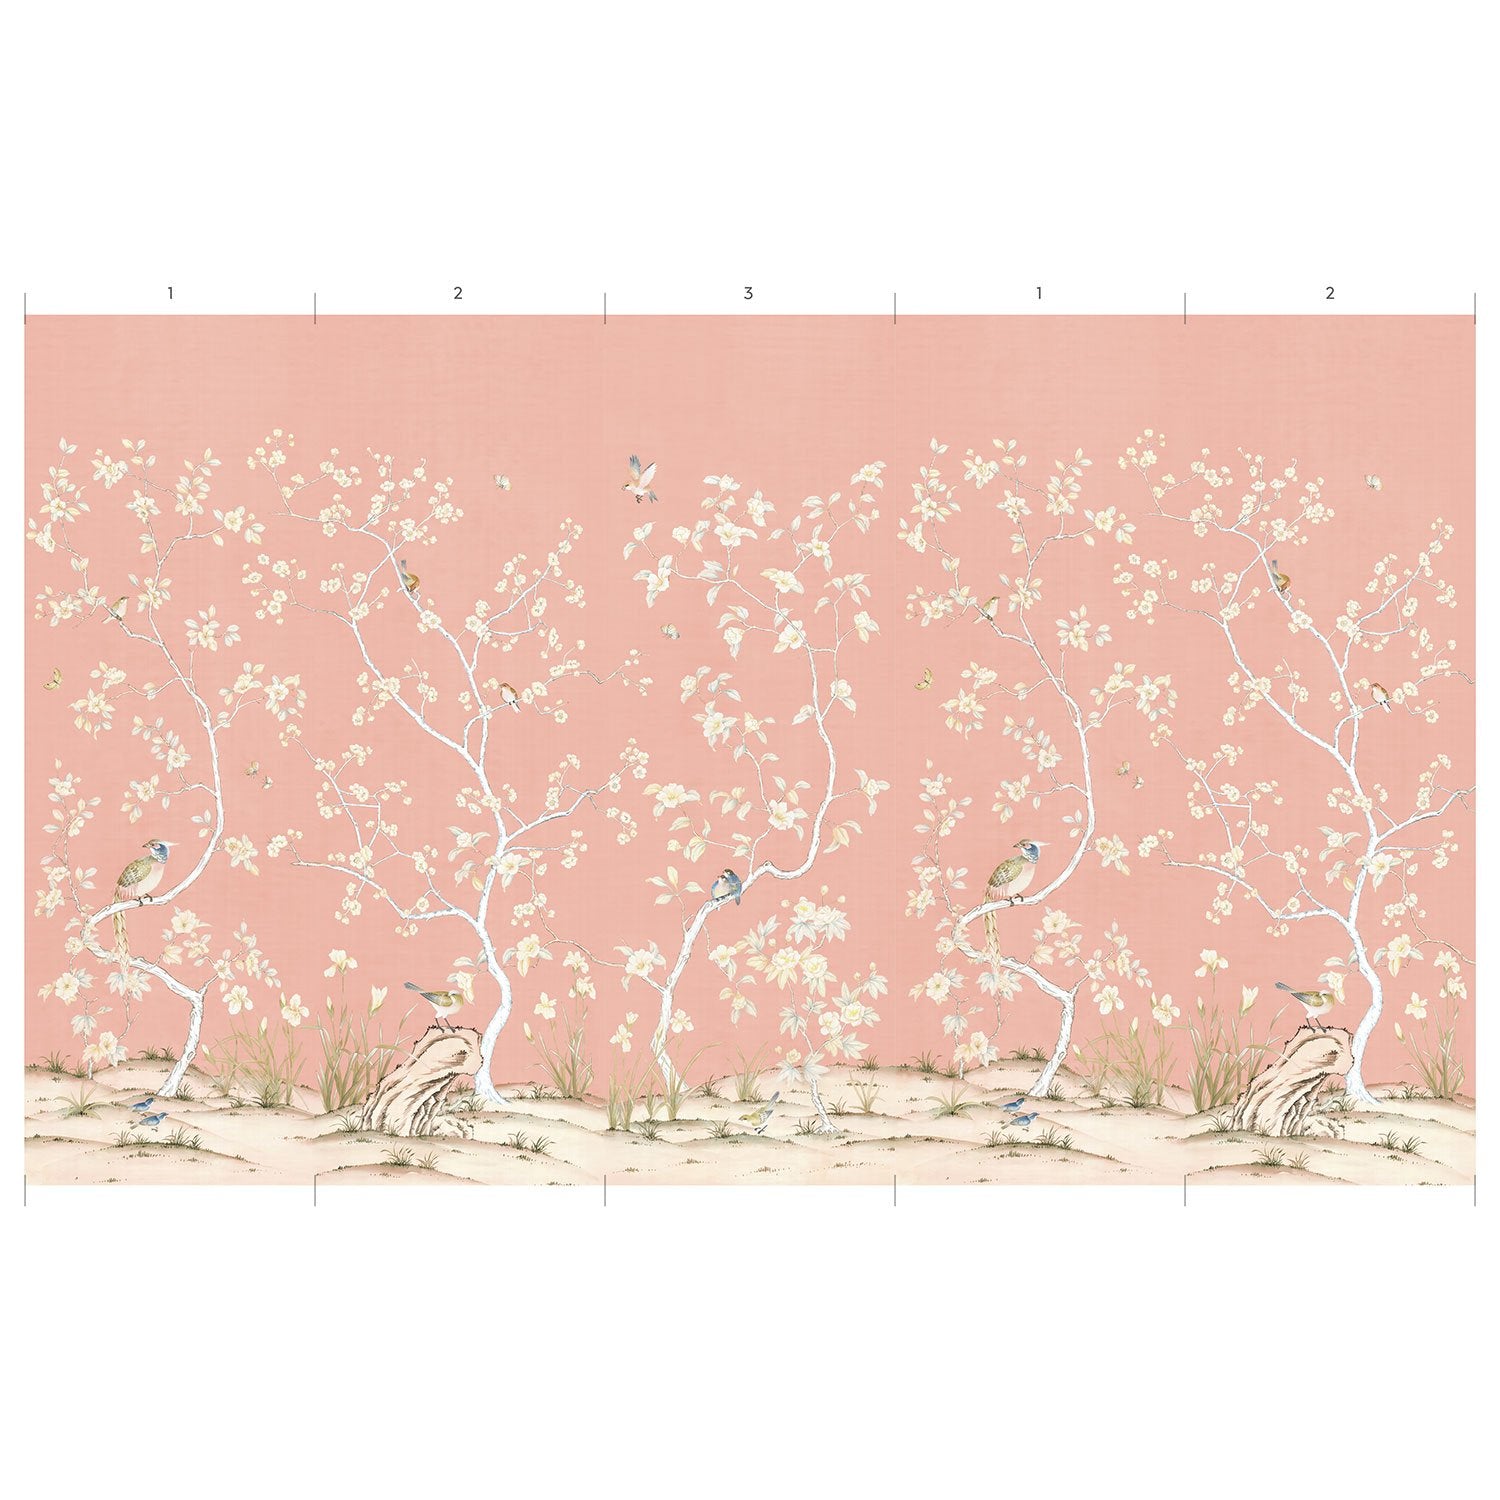 Mural Design Panels in Traditional Chinoiserie Carlisle Wallpaper in Coral